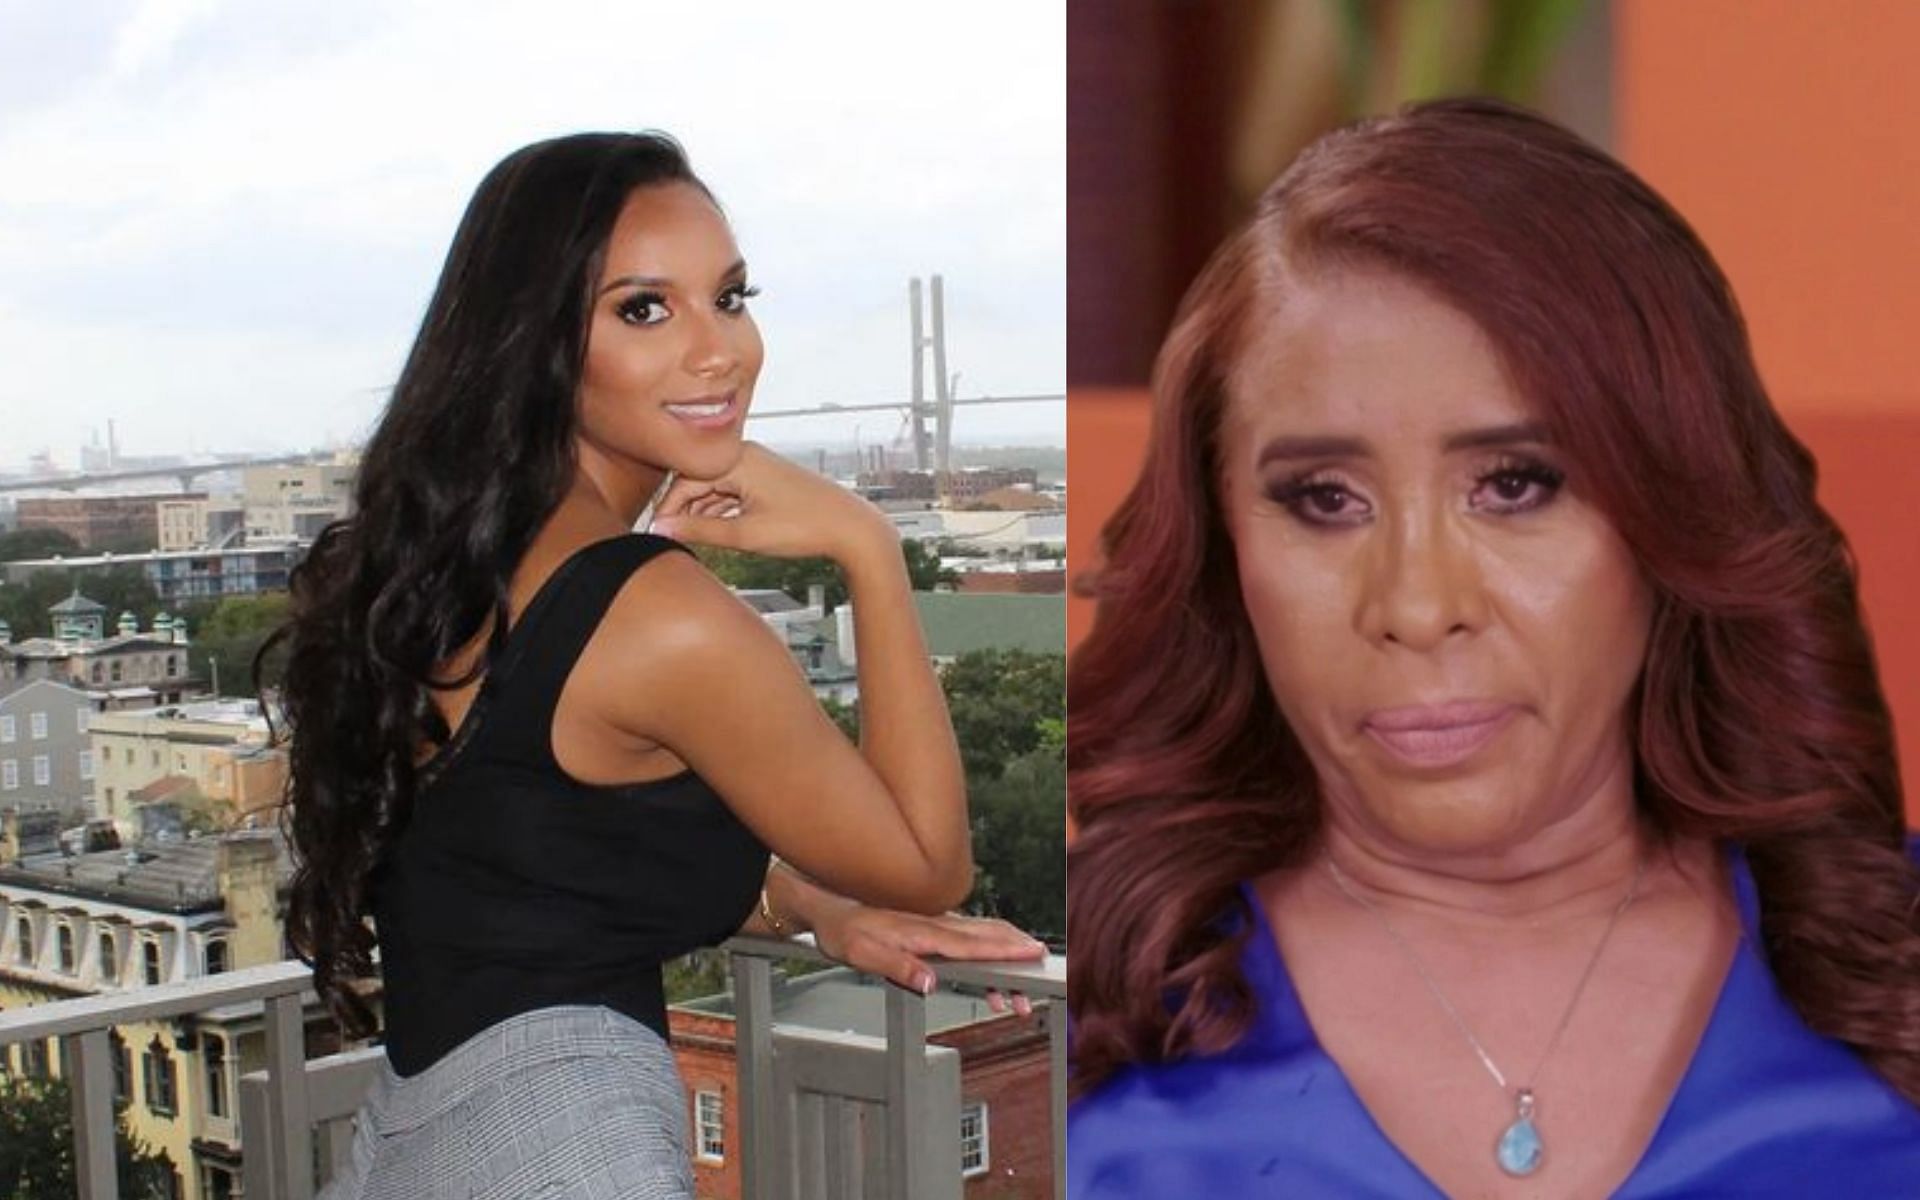 Chantel visits Lidia to save her marriage (Images via TLC and chantel_j_/Instagram)